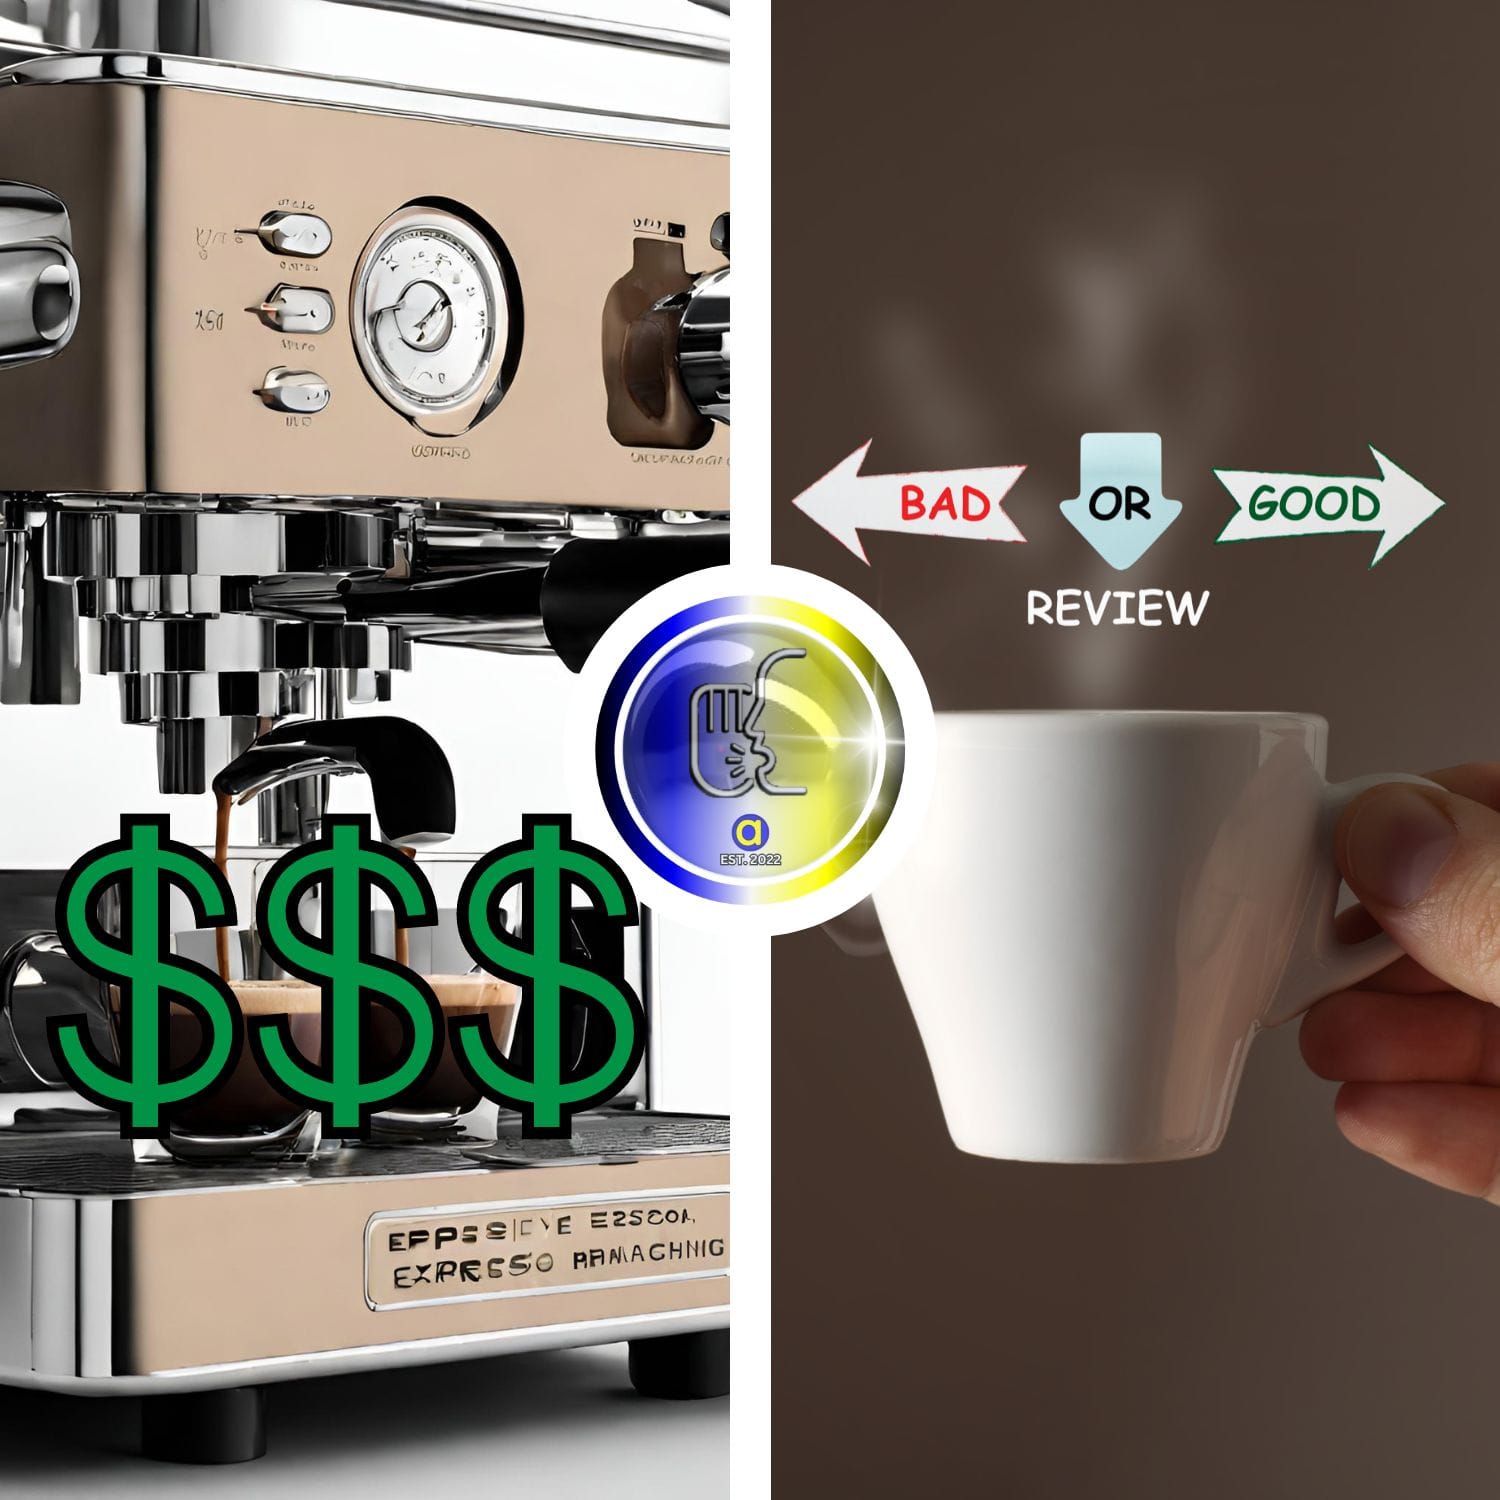 Does an Expensive Espresso Machine Make a Difference